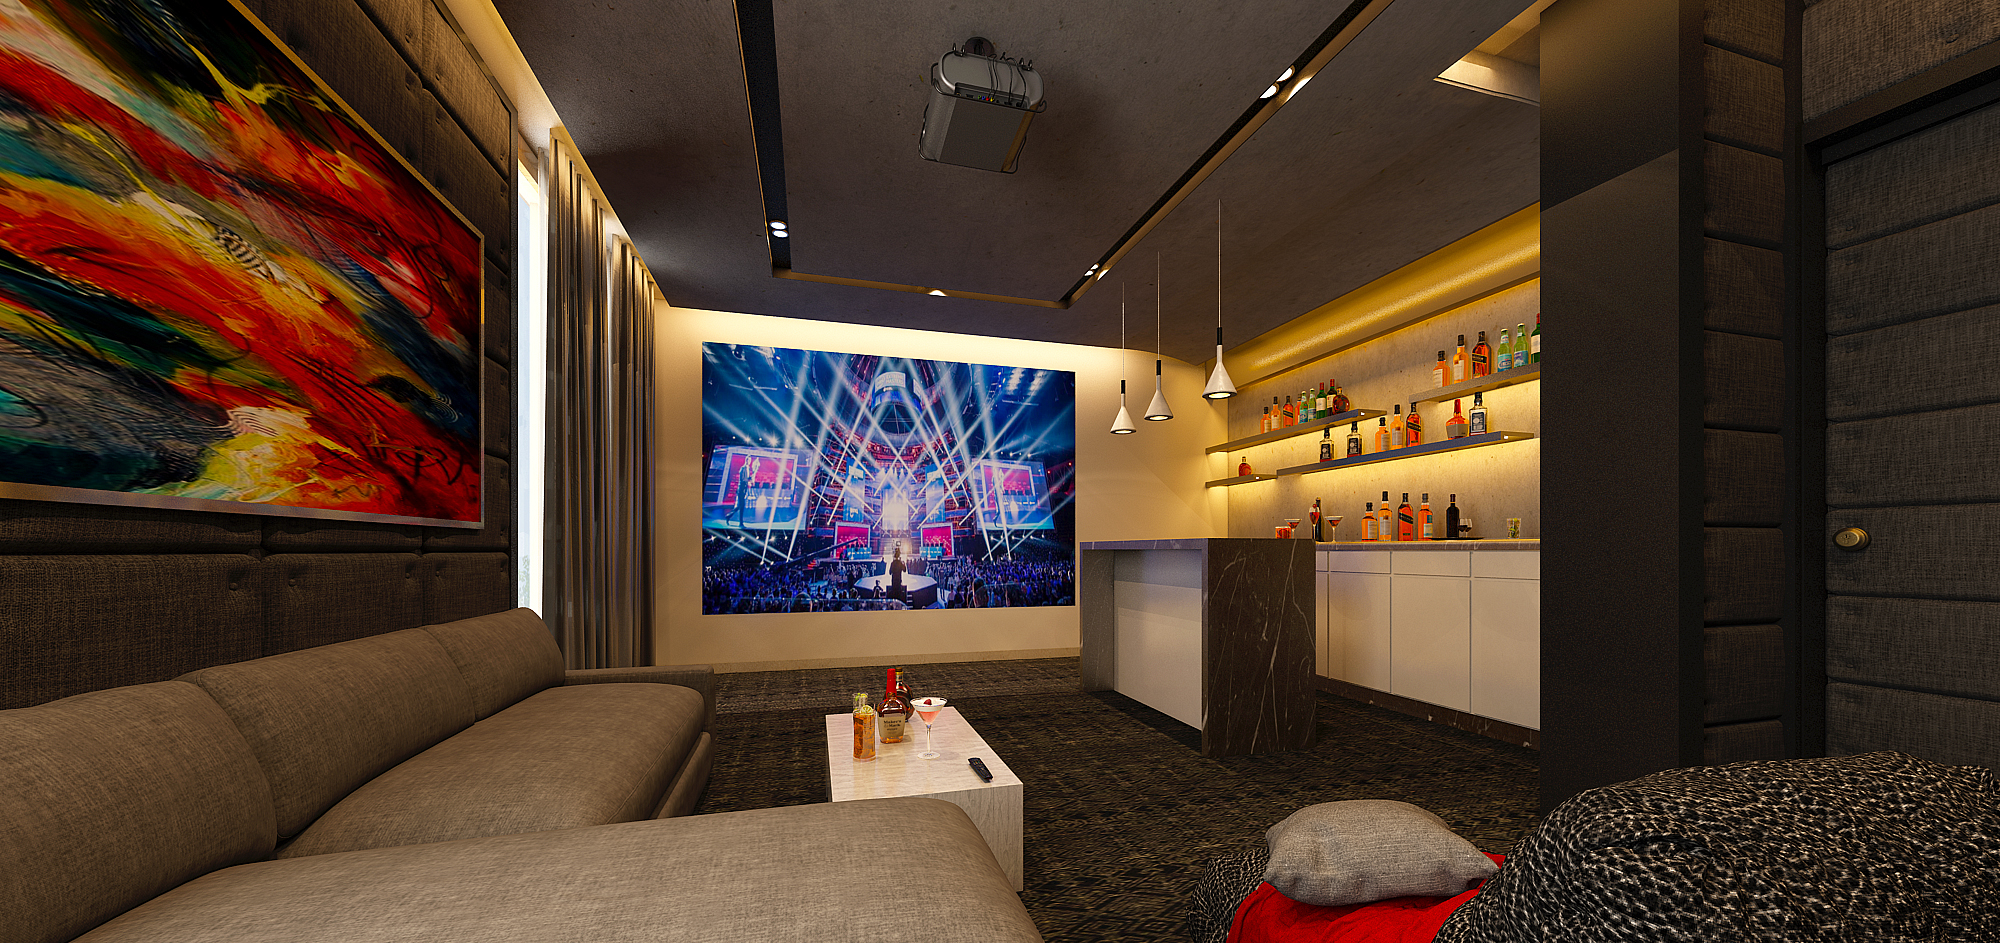 ENTERTAINMENT ROOM AND GYM INTERIOR-6